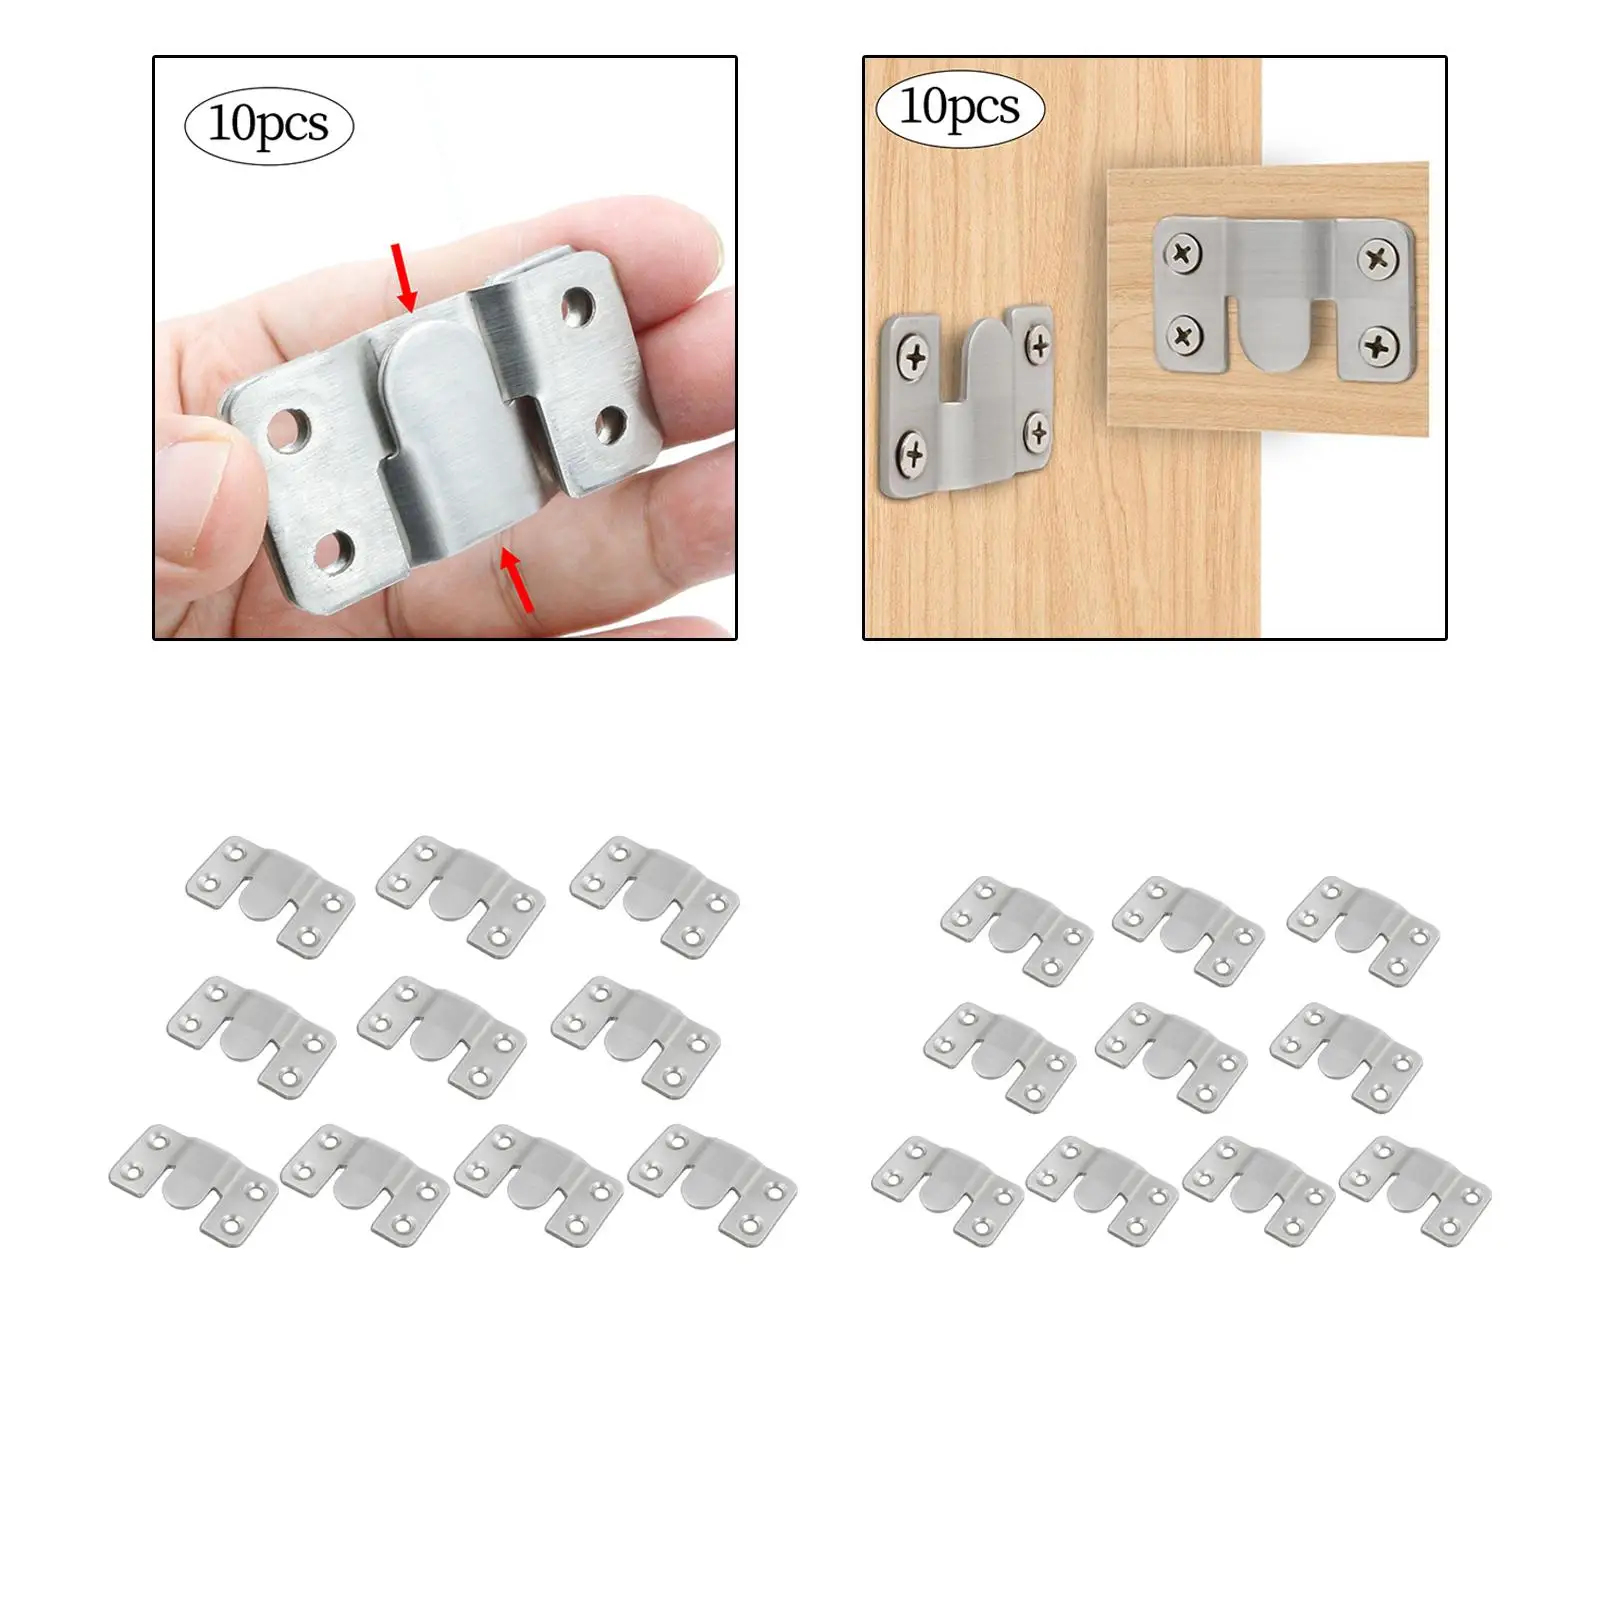 10x Flush Mount Bracket Headboard Wall Mount Hardware Z Clip Photo Frame Hooks for Hardware Mirrors Wall Cabinet Picture Display